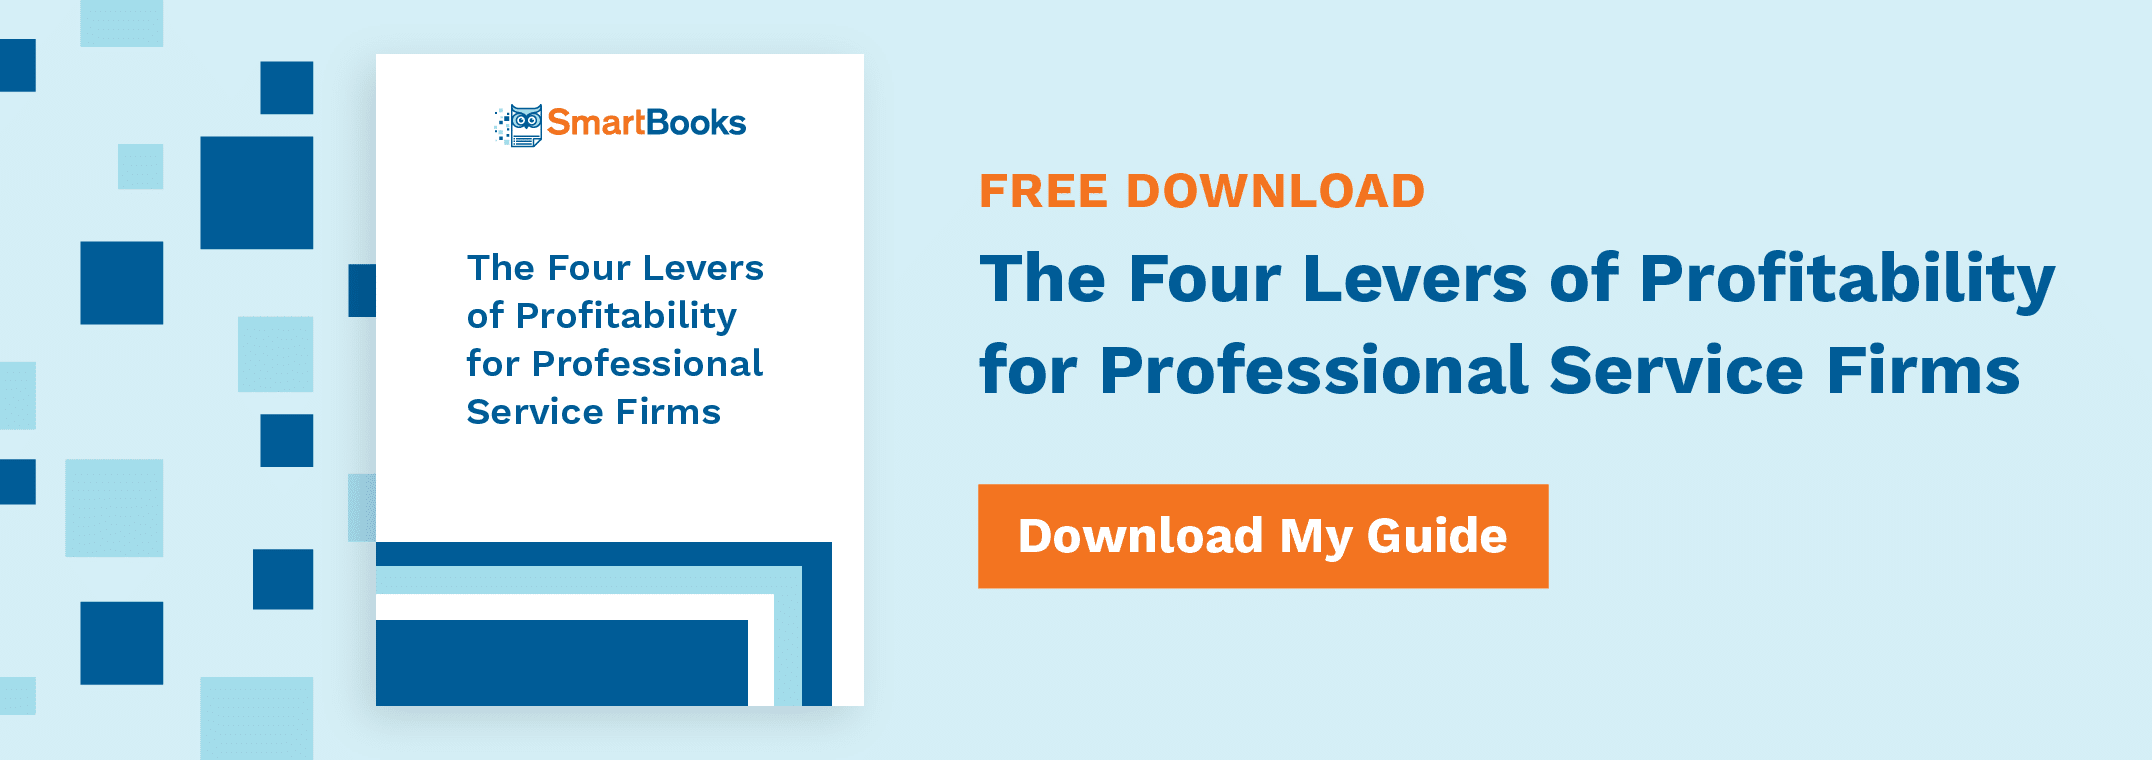 The Four Levers of Profitability for Professional Service Firms